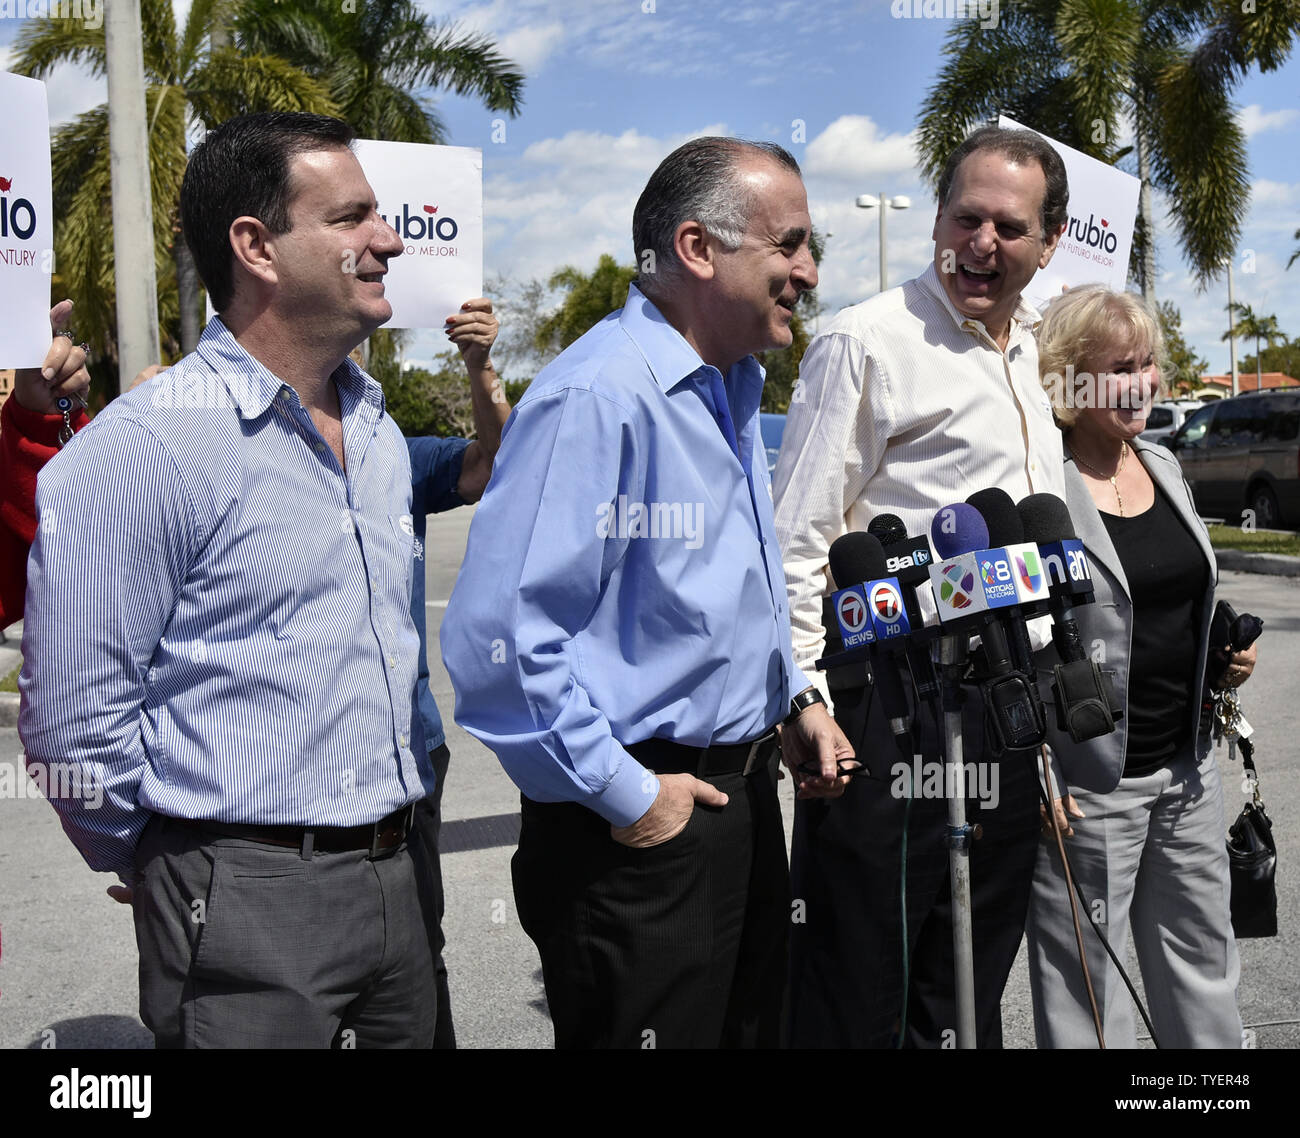 Early voting in the Republican presidential primary began in Miami-Dade County, Florida, February 29, 2016, At the John F. Kennedy Library, Hialeah, Florida., (L-R) Council President Luis Gonzalez, Miami-Dade County Commissioner,Esteban Bovo,  Former Congressman, Lincoln Diaz-Balart,and  Hialeah City Councilman.Lourdes Lozano, talk to the media urging South Floridians to vote for Marco  Rubio and reject the extremist and divisive campaign of demagogue Donald Trump. Photo by Gary I Rothstein/UPI Stock Photo